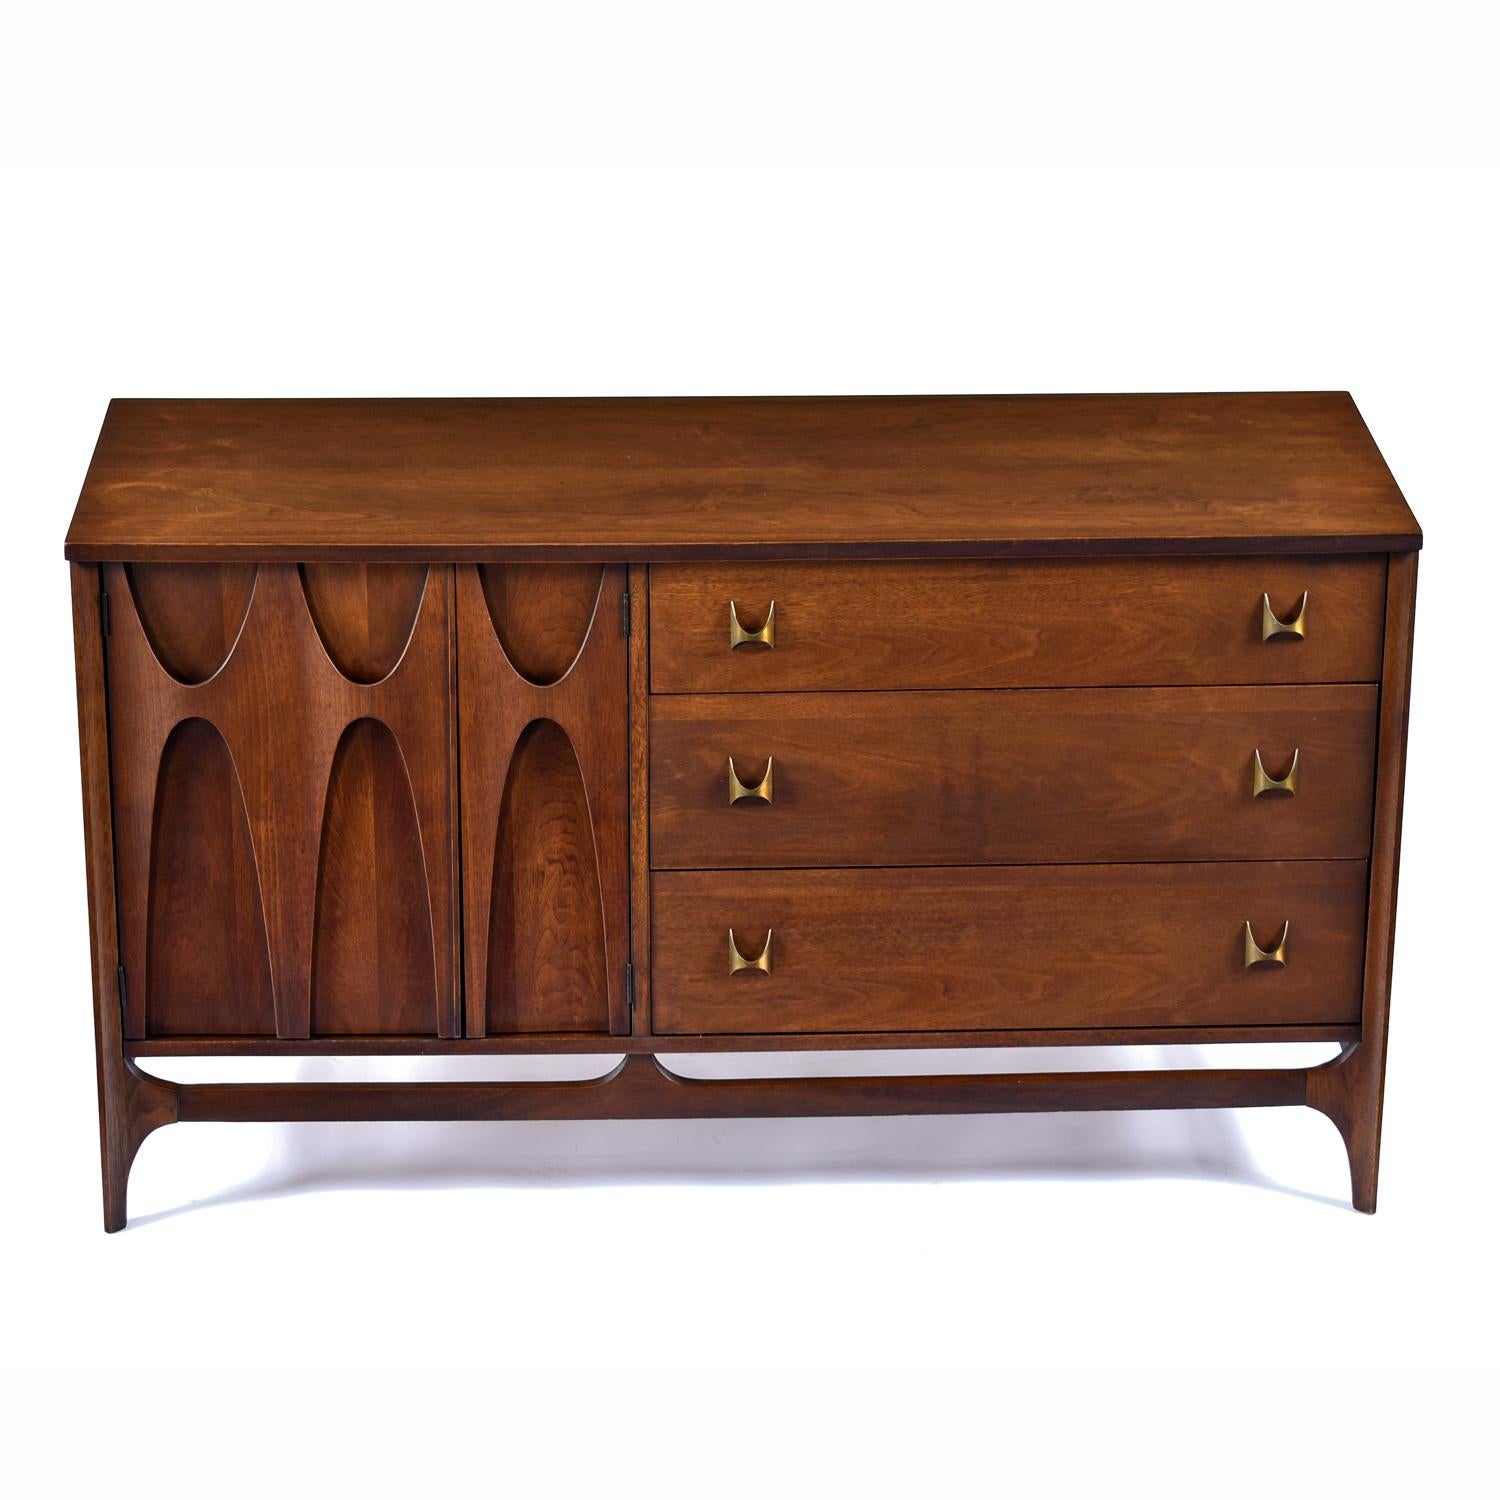 This Brasilia Credenza was delicately restored to preserve the original patina. The Brasilia line has elevated to a high-end status that has made these pieces very sought after and subsequently harder to find. We love this line and have never seen